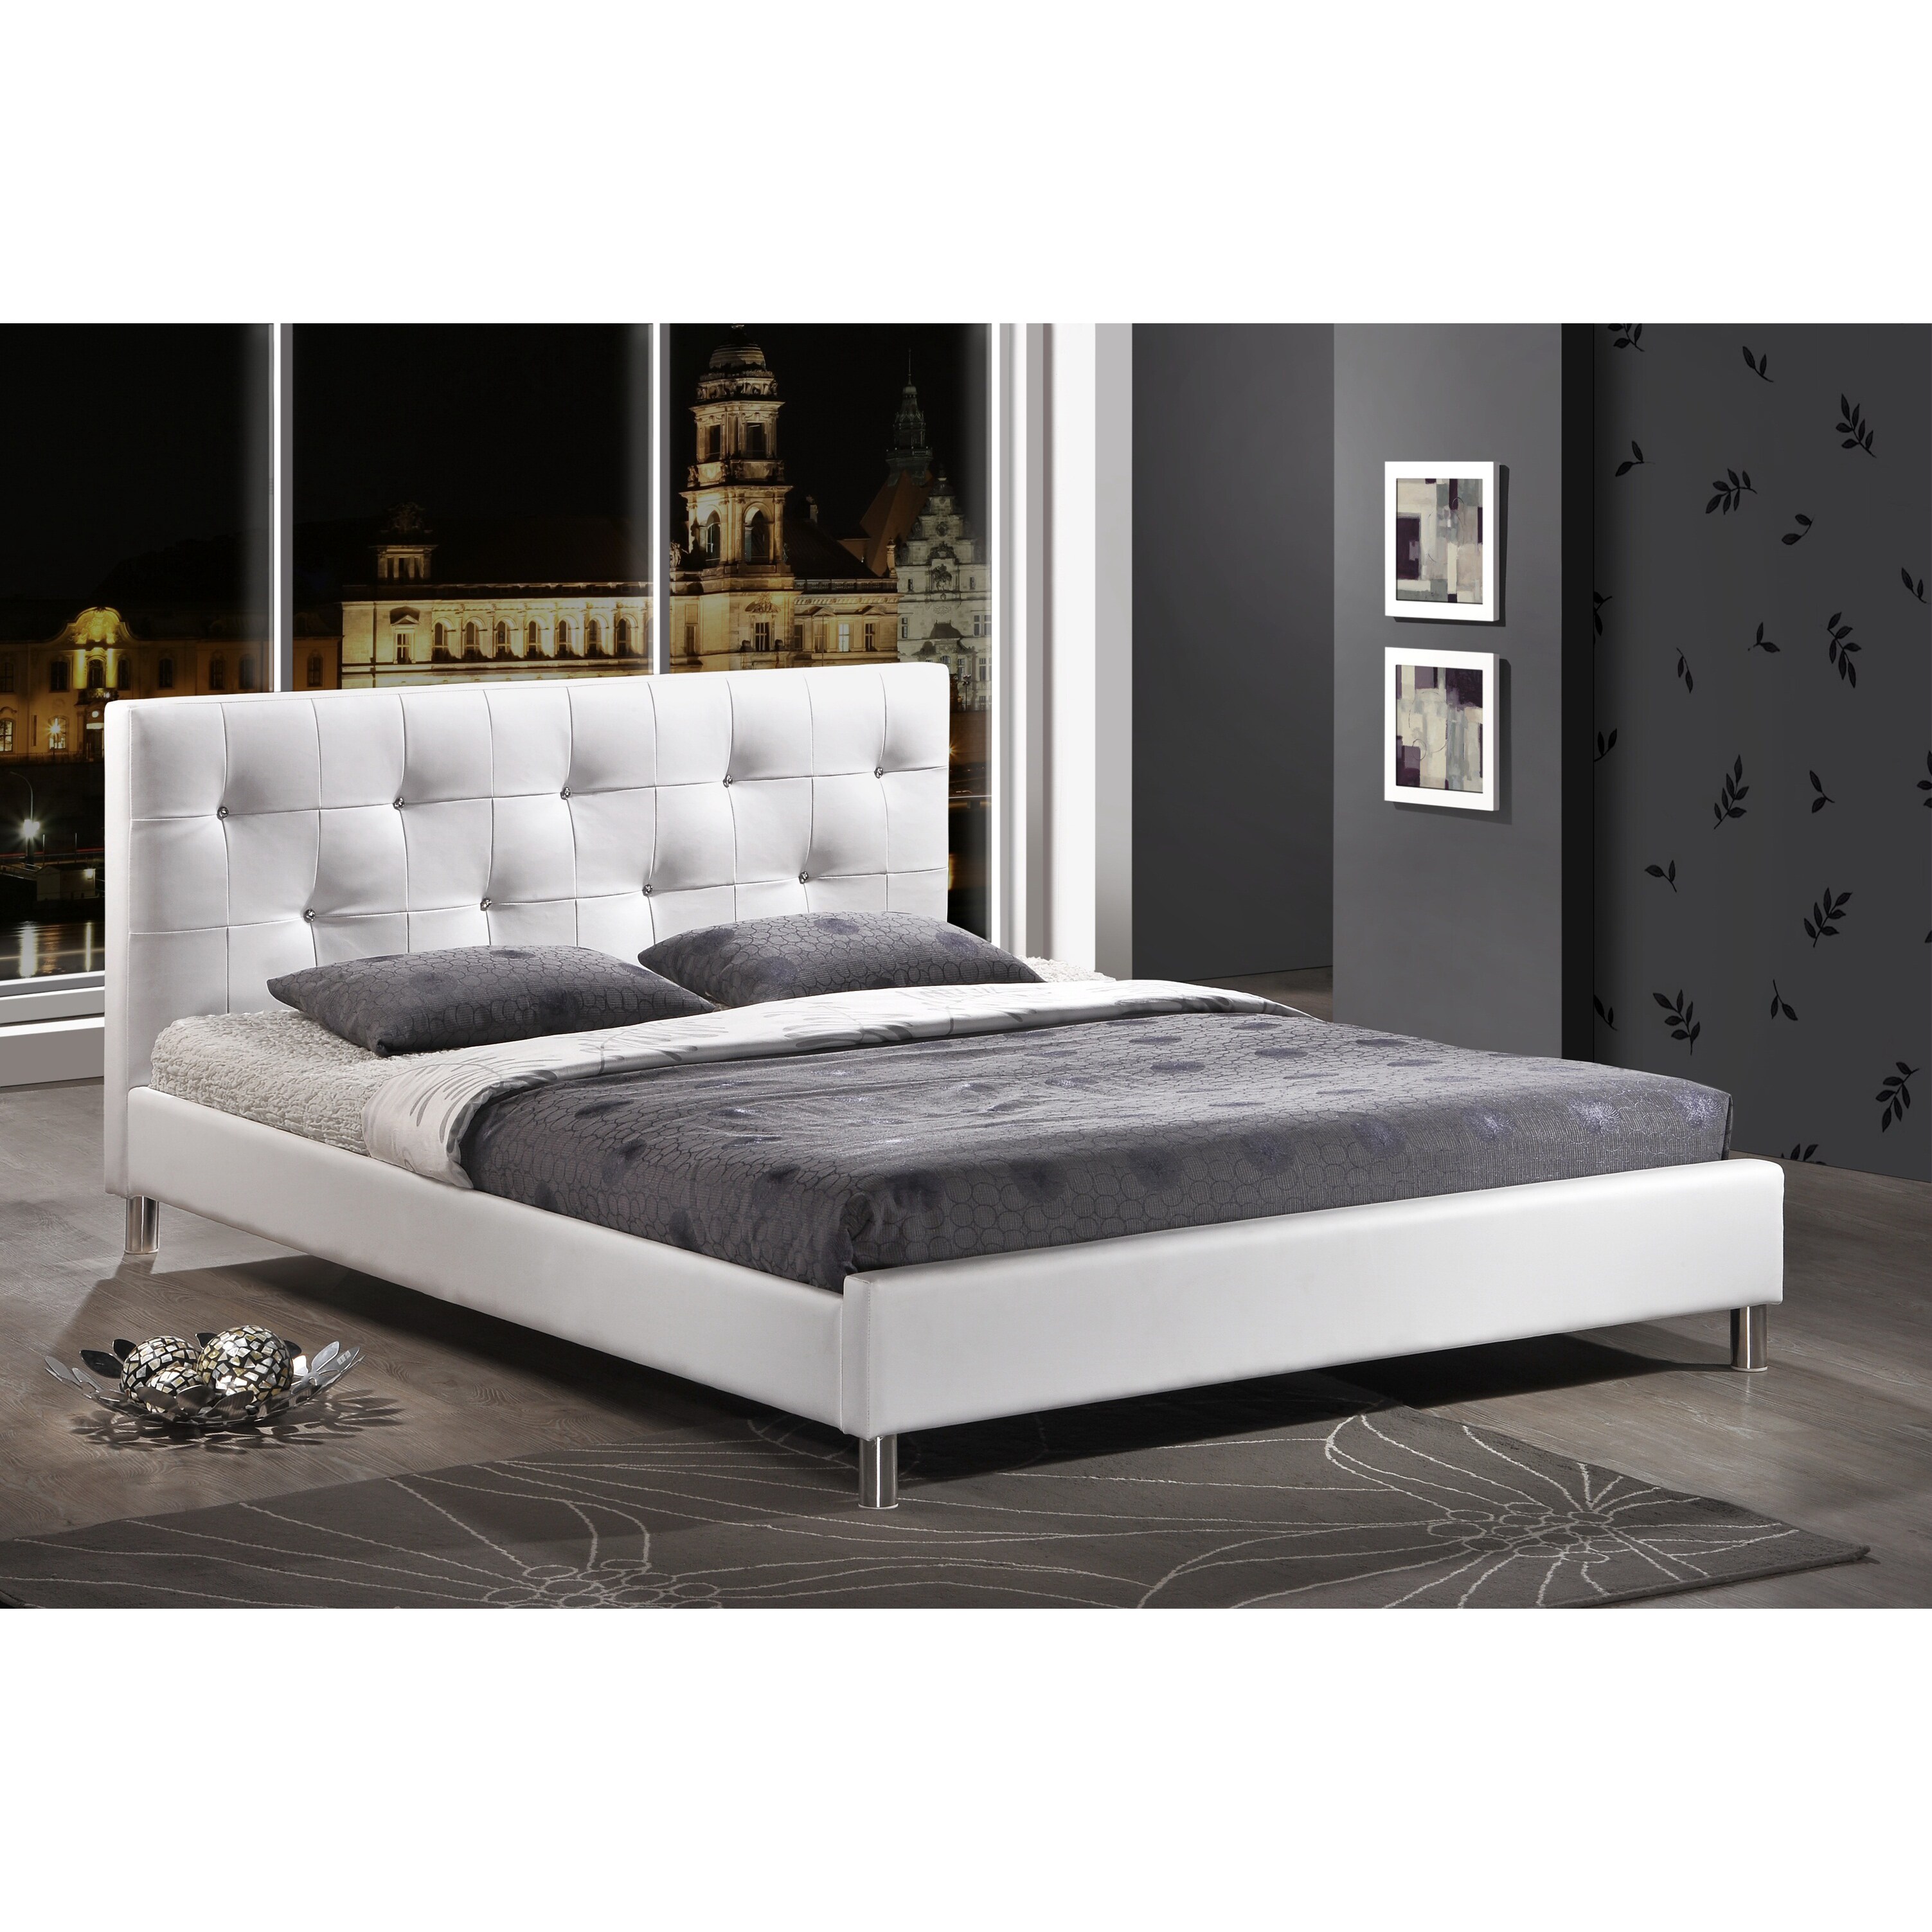 NEW! Soft White Tufted Upholstered Queen Size Bed Bedroom Furniture 